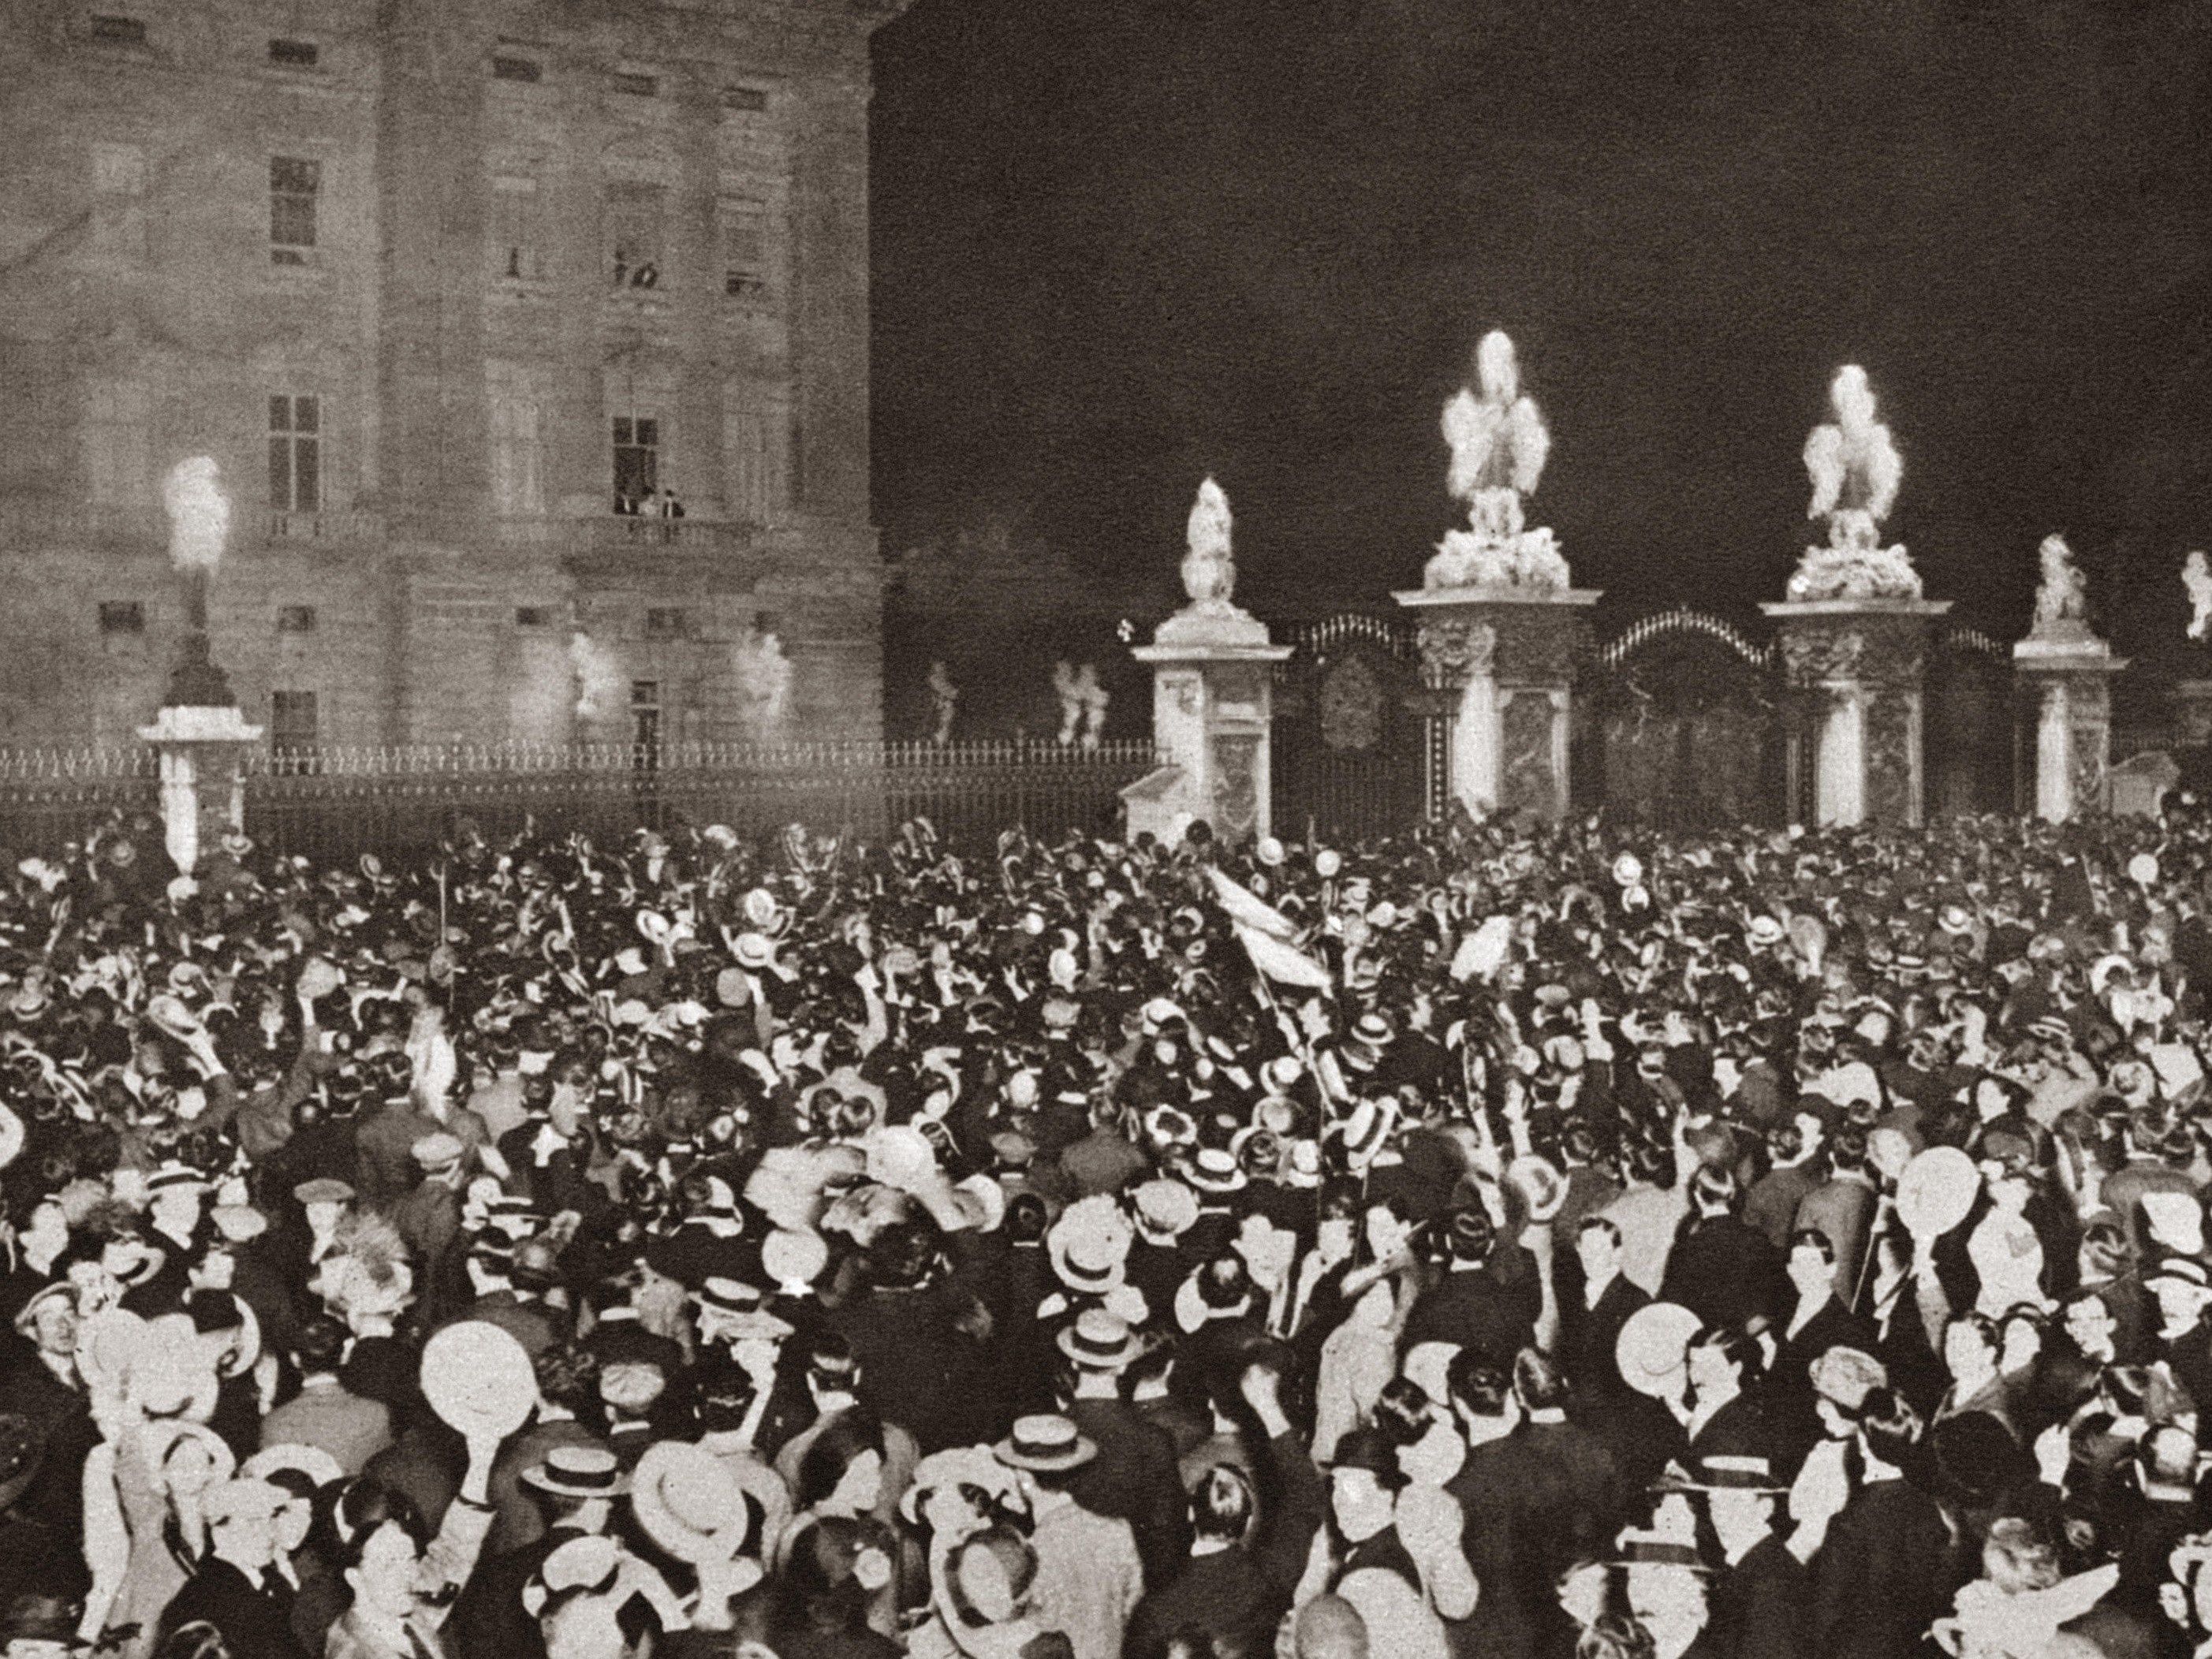 Crowds outside Buckingham Palace cheering the royal family after Britain declared war with Germany in 1914